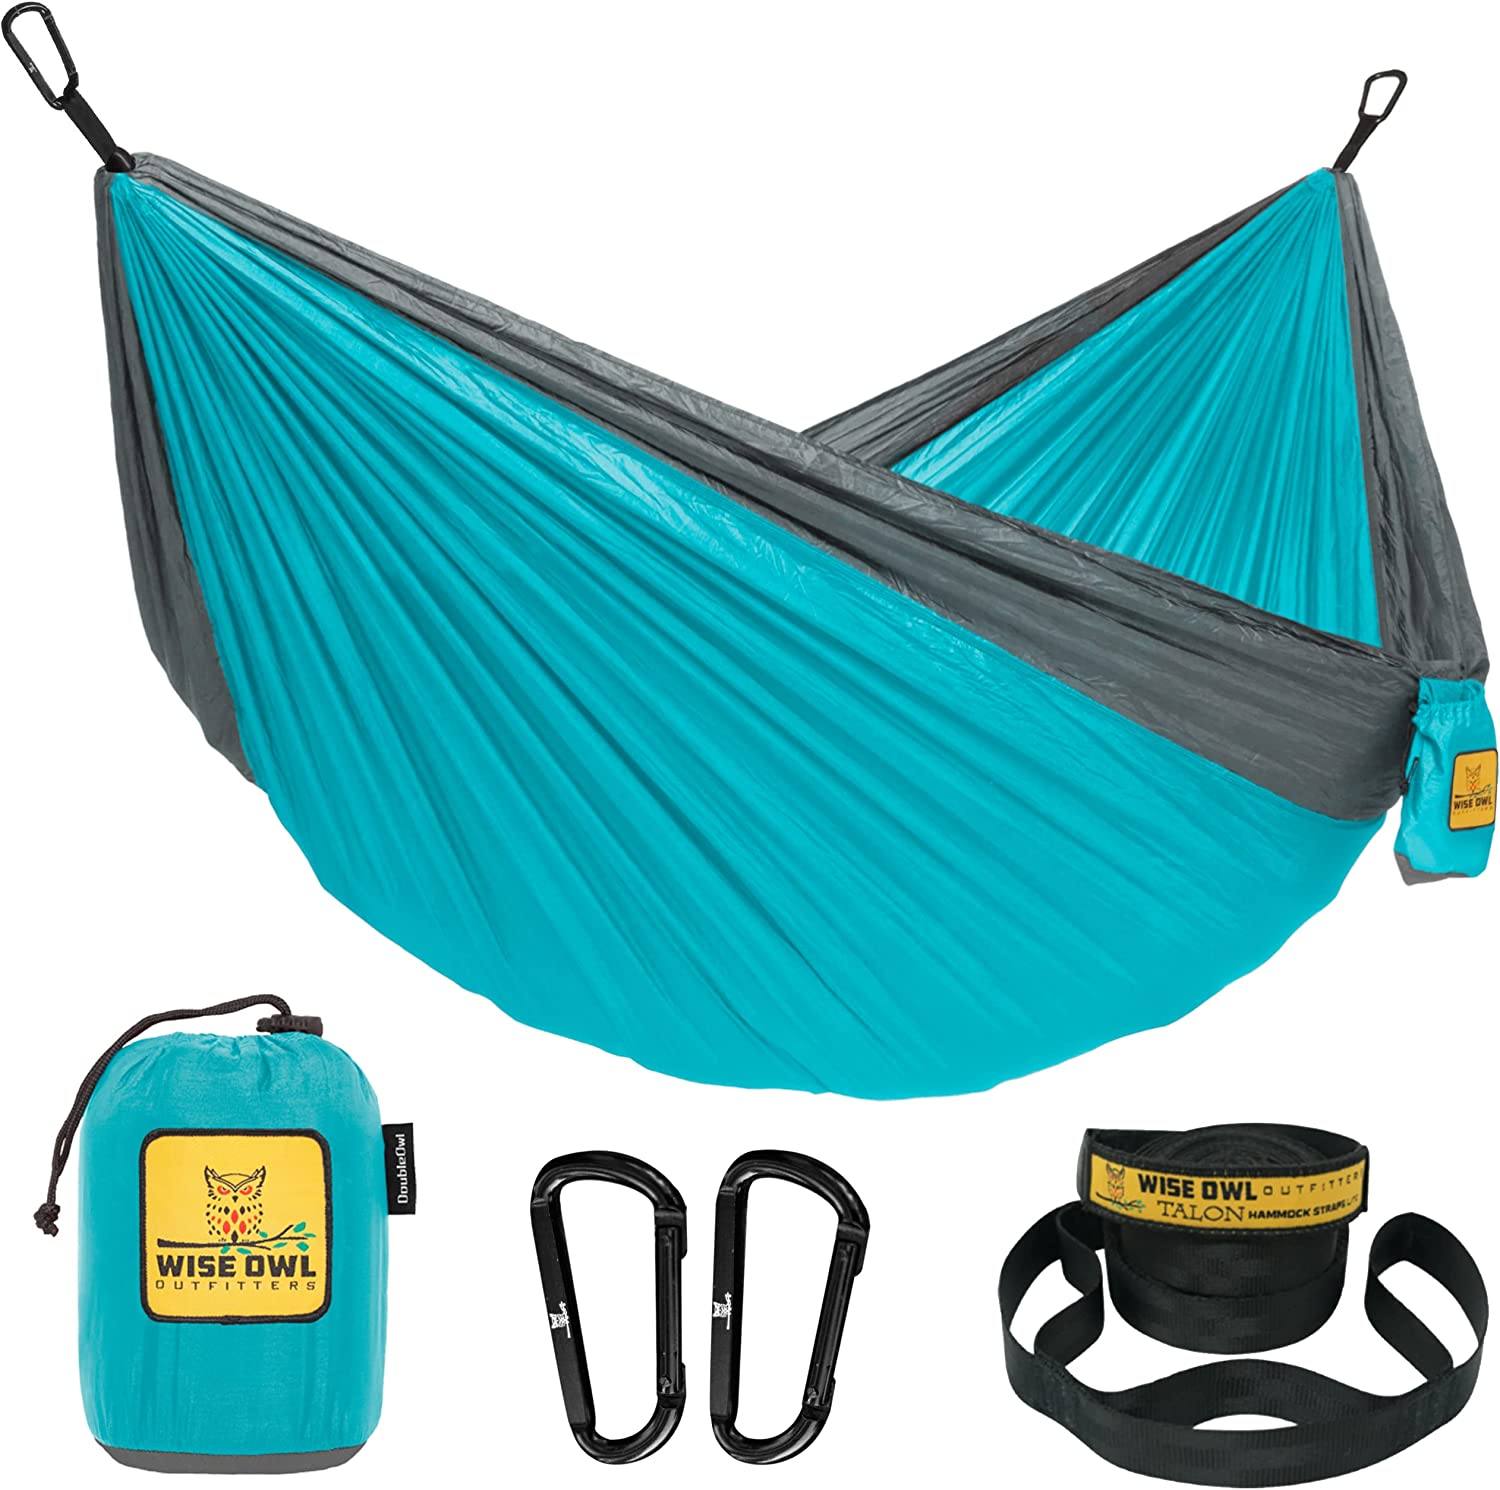  1. Wise Owl Outfitters Hammock Camping 